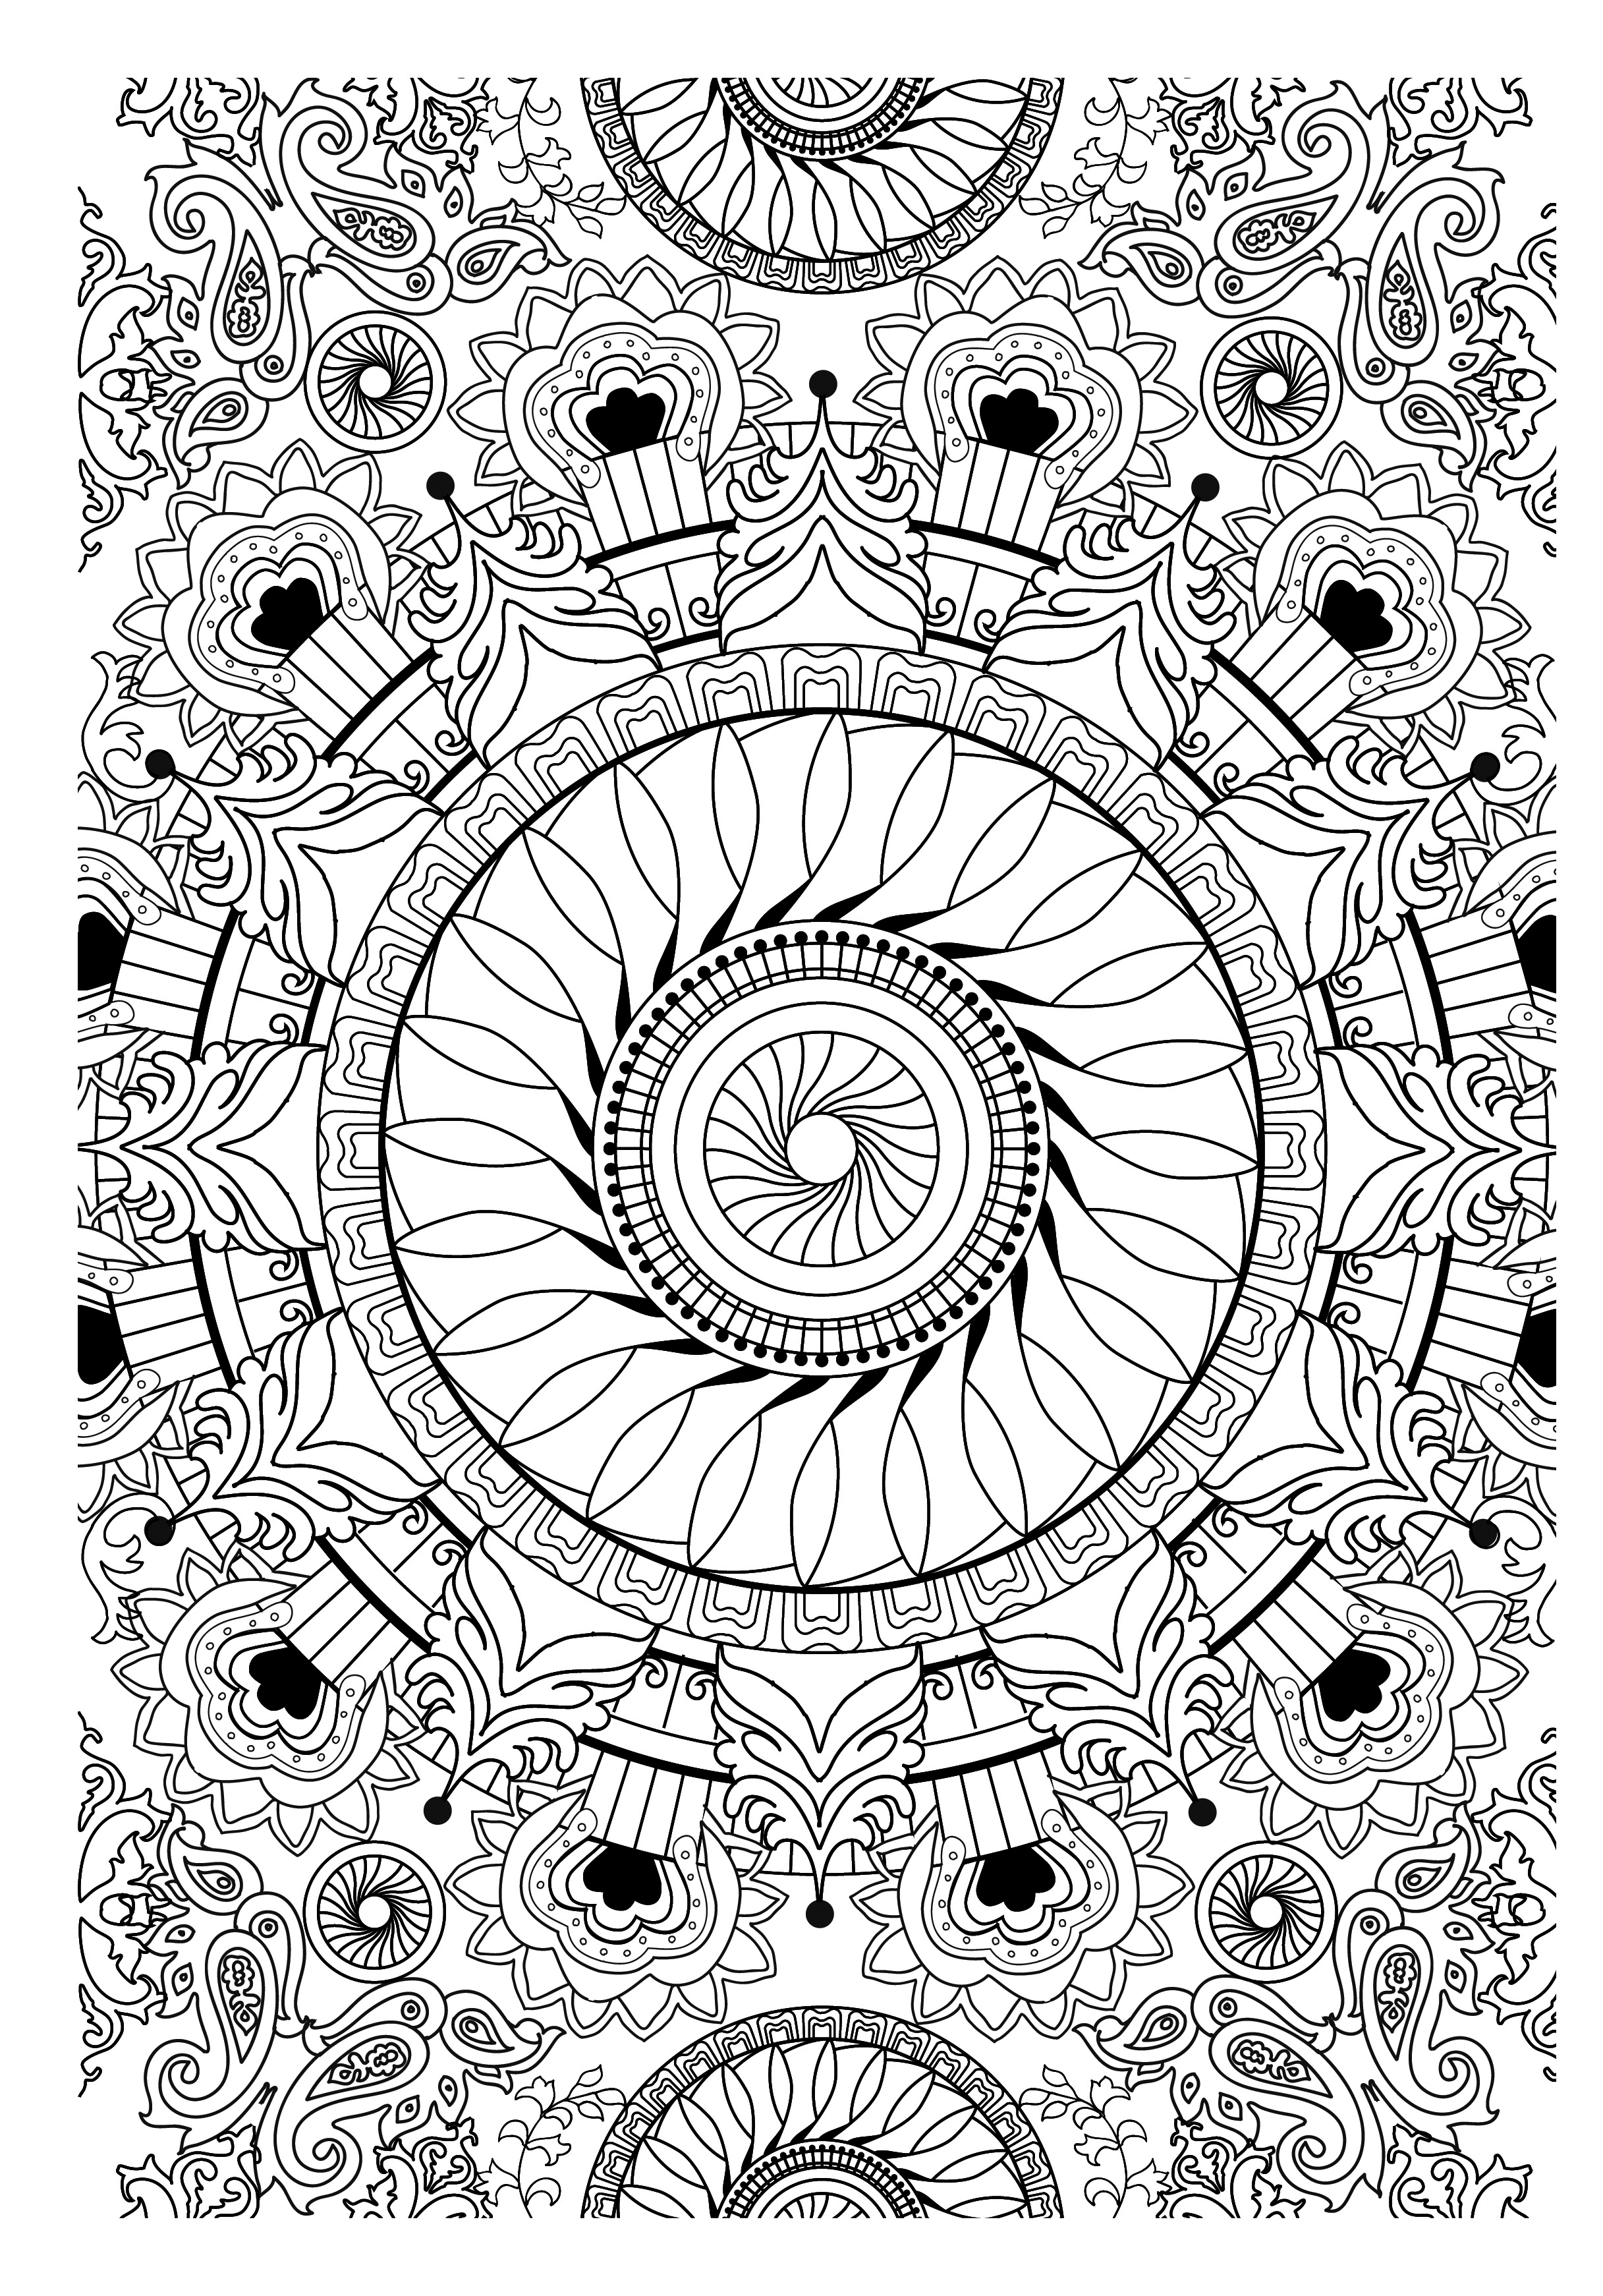 drawing-anti-stress-126888-relaxation-printable-coloring-pages